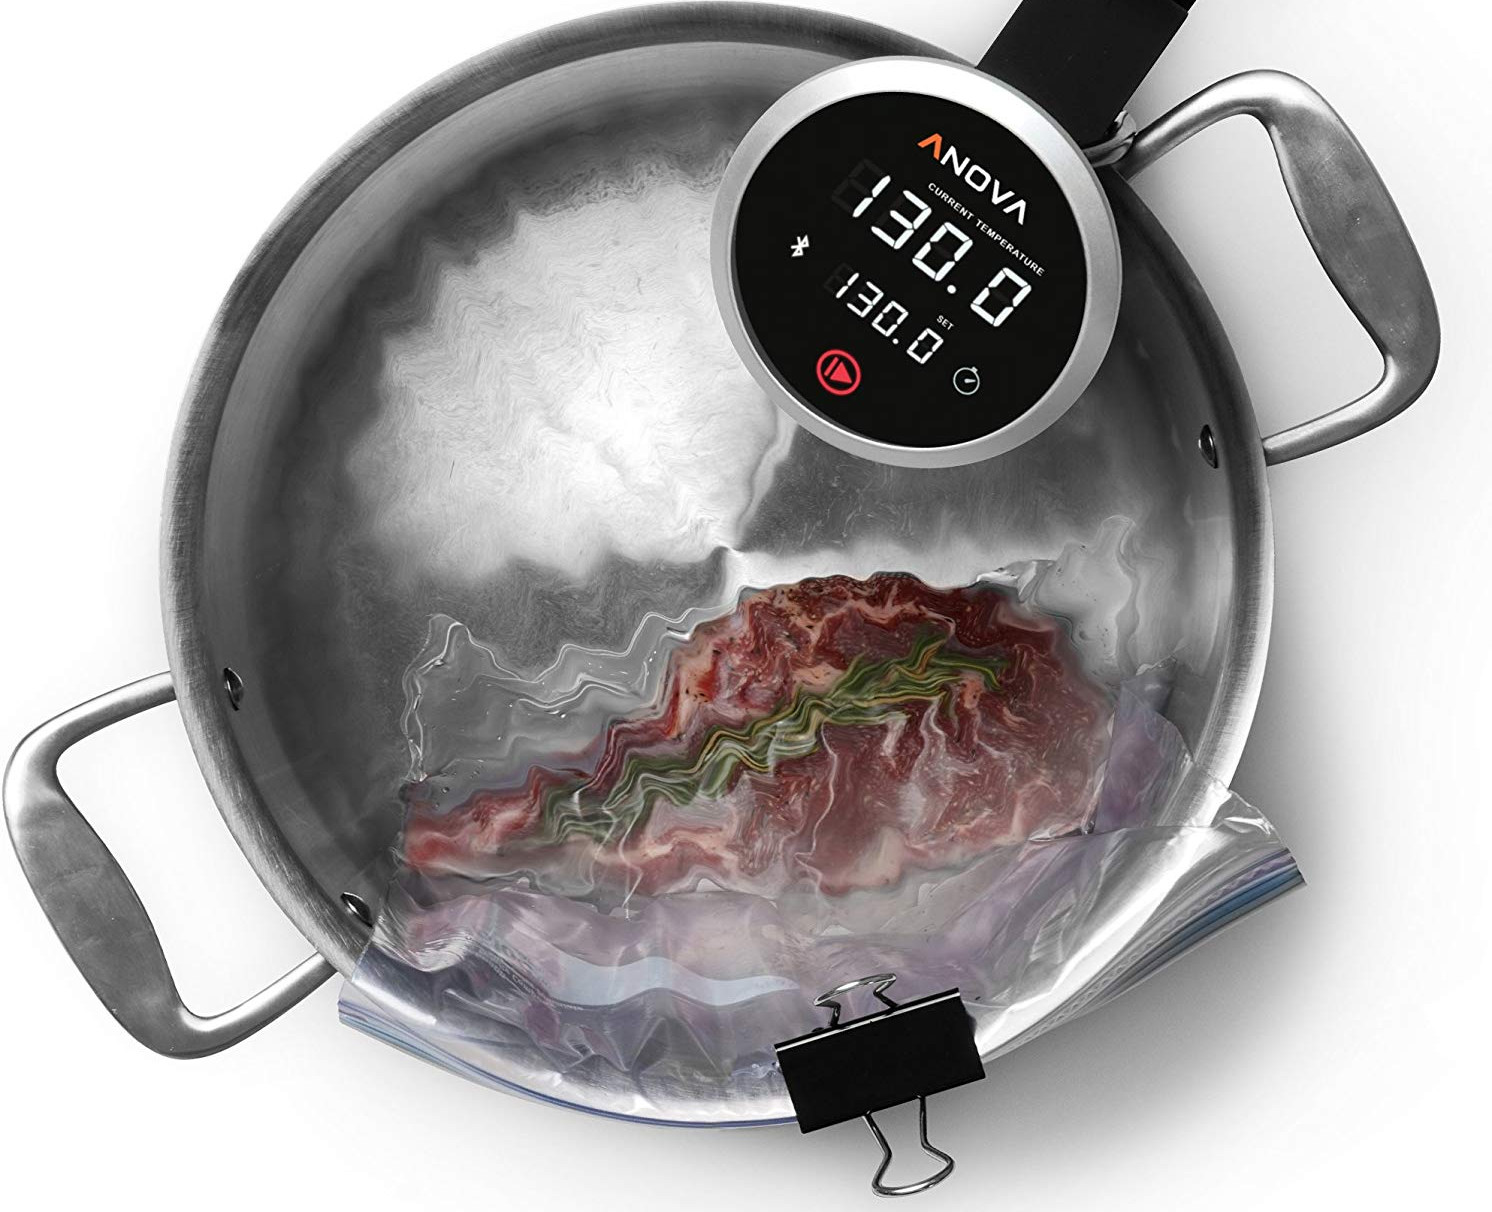 Rib-eye steak with rosemary cooked sous vide in water bath